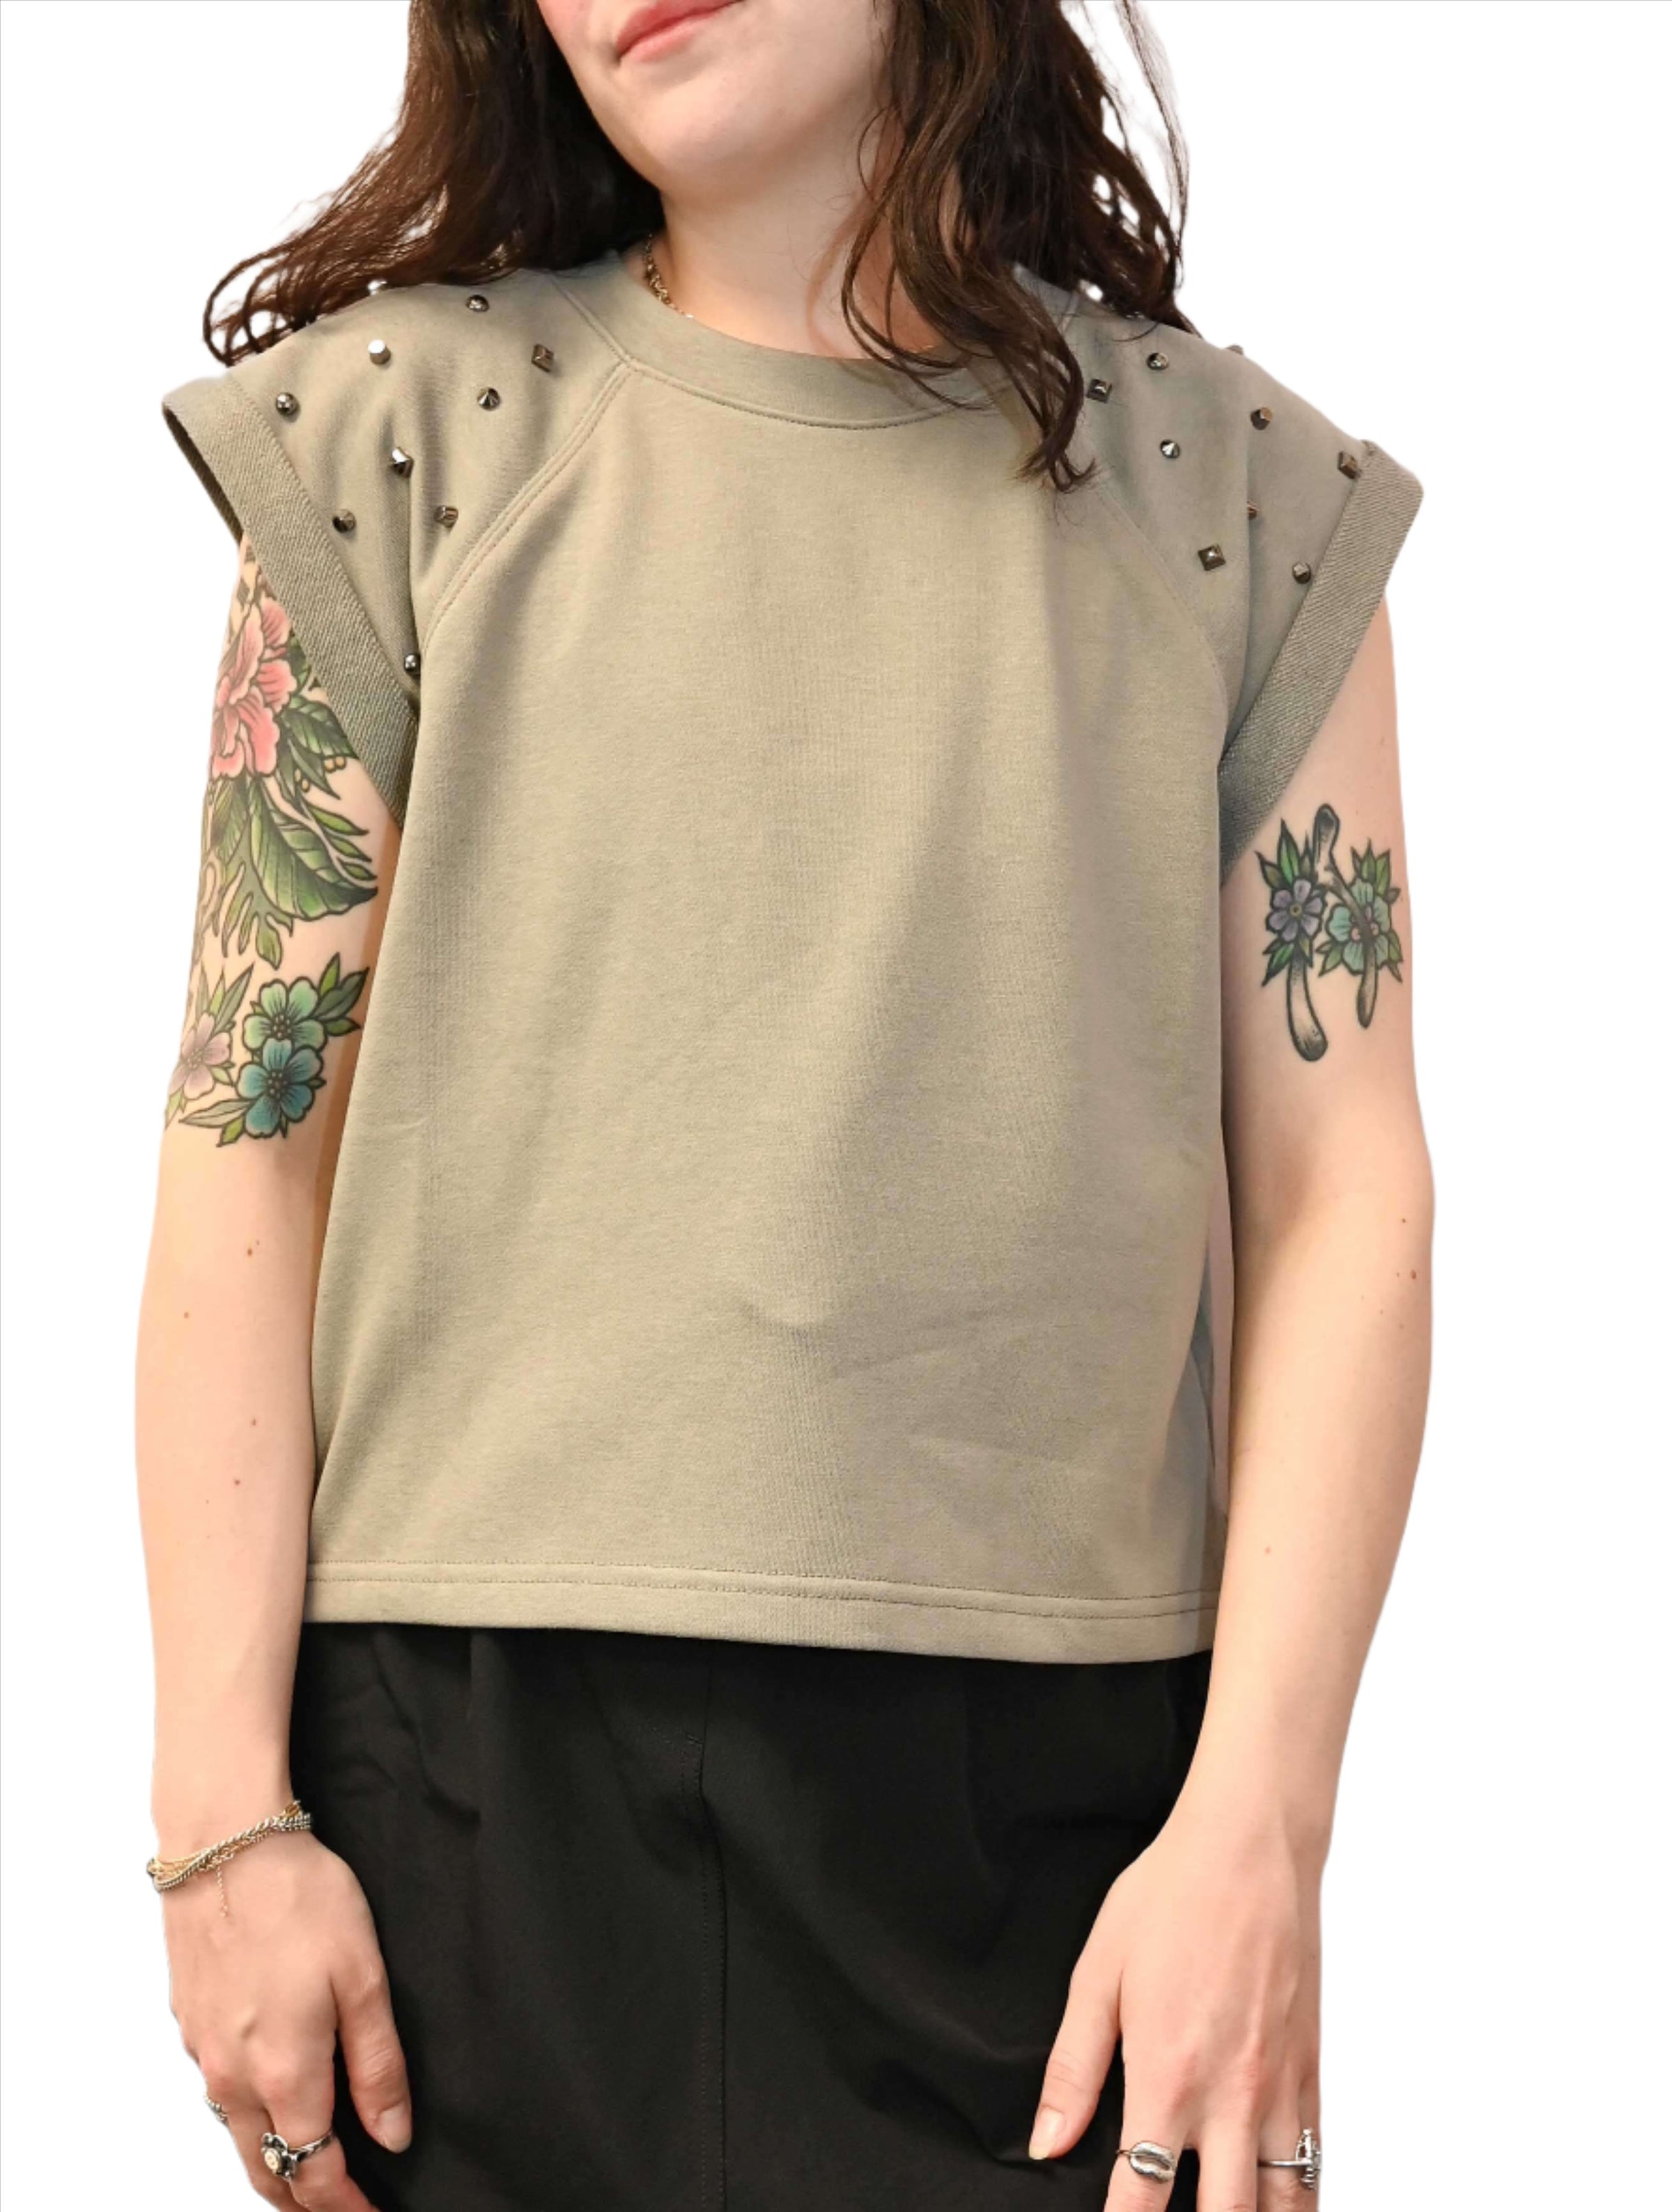 Sleeveless Top With Shoulder Metal Detail